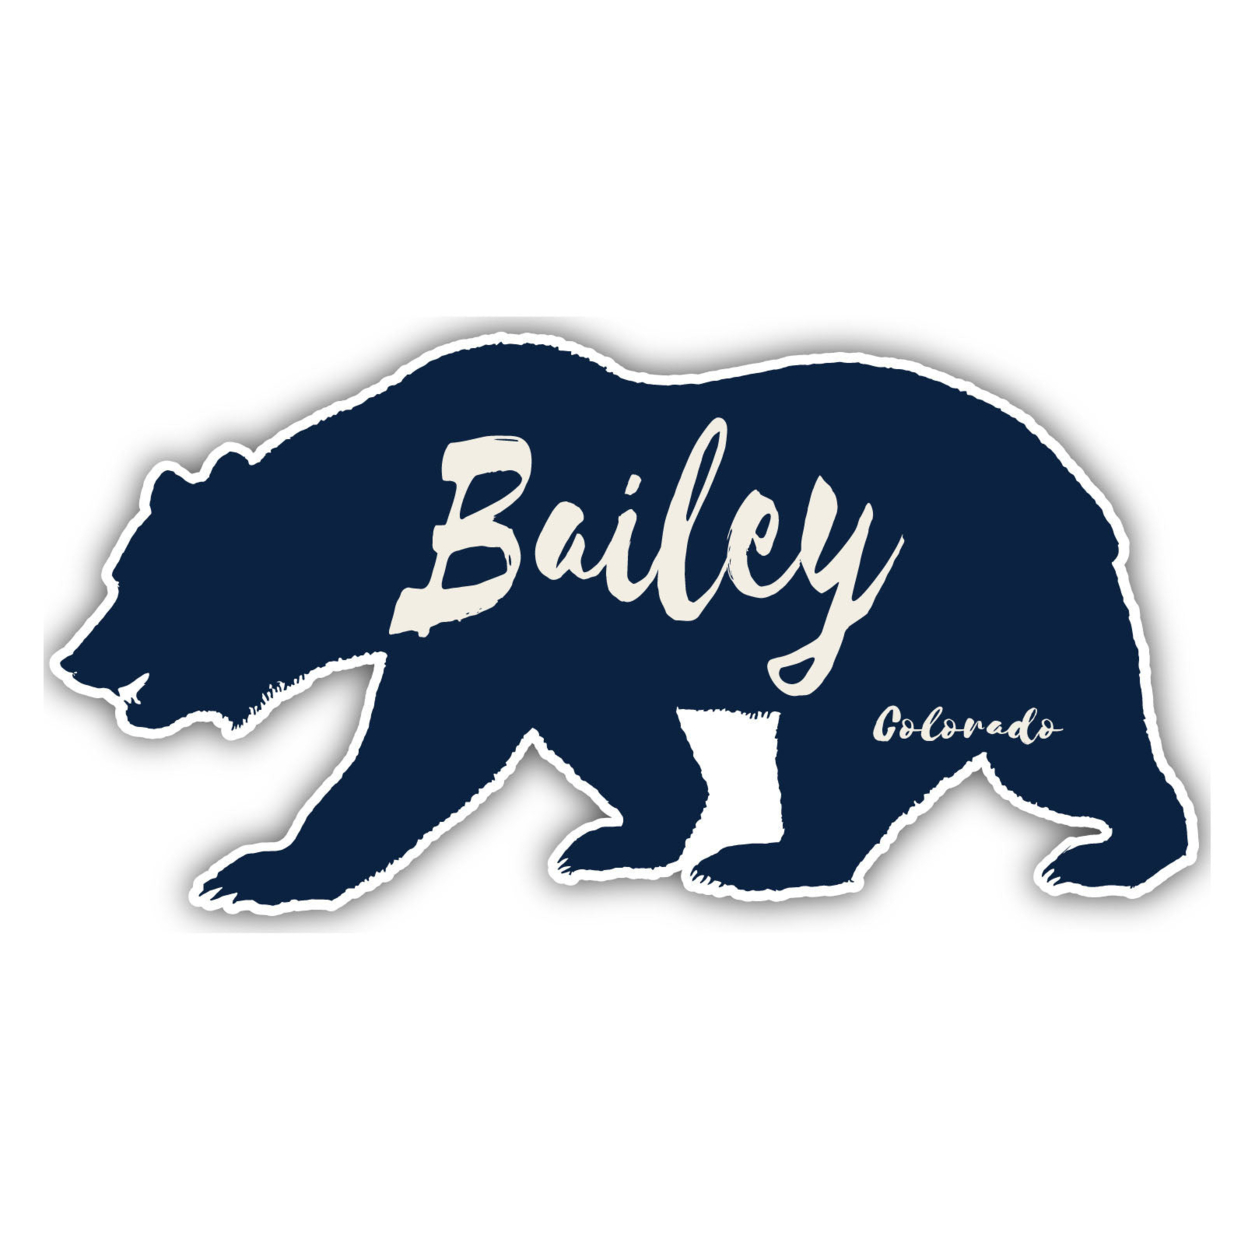 Bailey Colorado Souvenir Decorative Stickers (Choose Theme And Size) - 4-Pack, 8-Inch, Bear